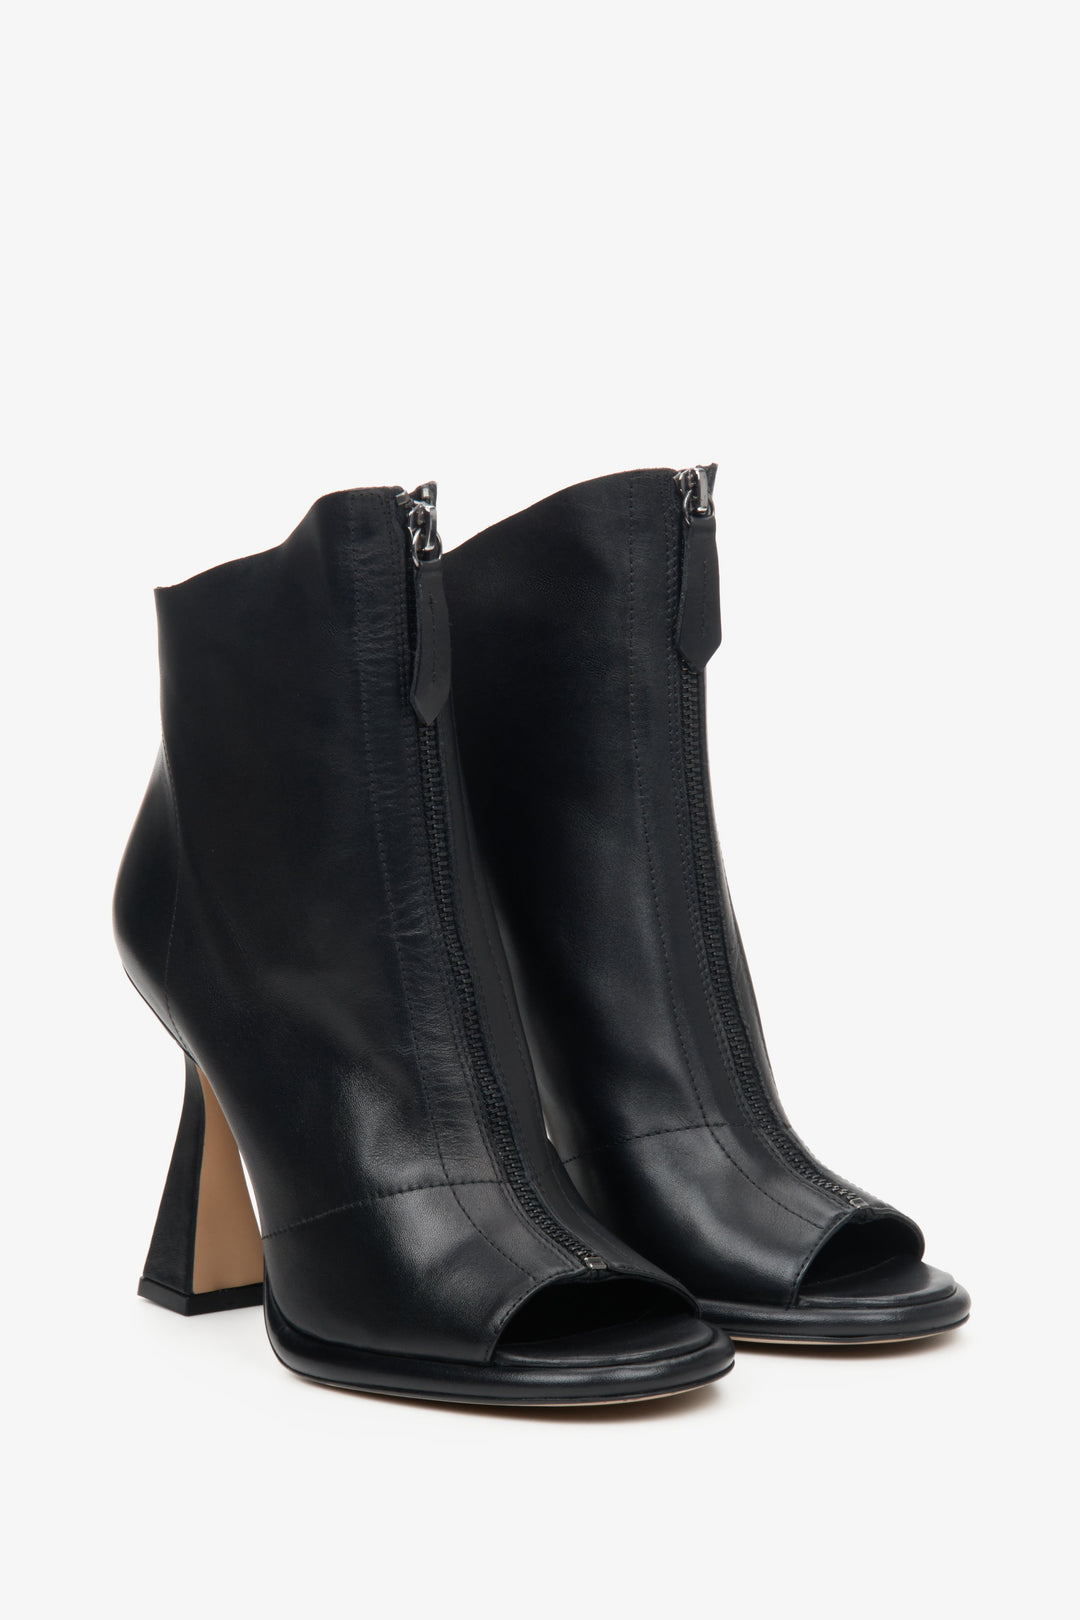 Black leather Estro women's open-toe ankle boots - close-up of the top of the shoes.